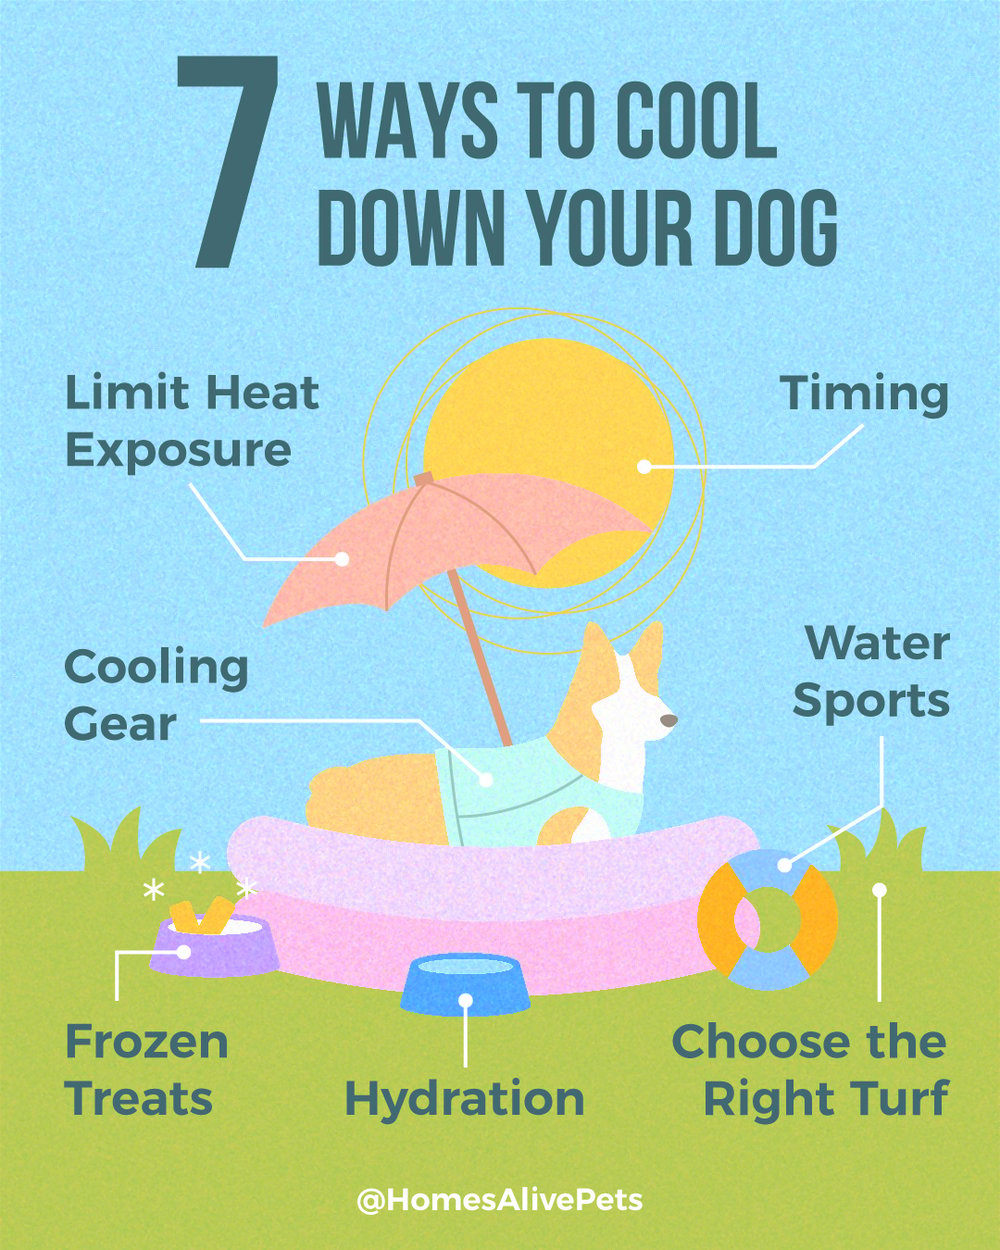 7-Ways-to-Cool-Down-Your-Dog-infographic